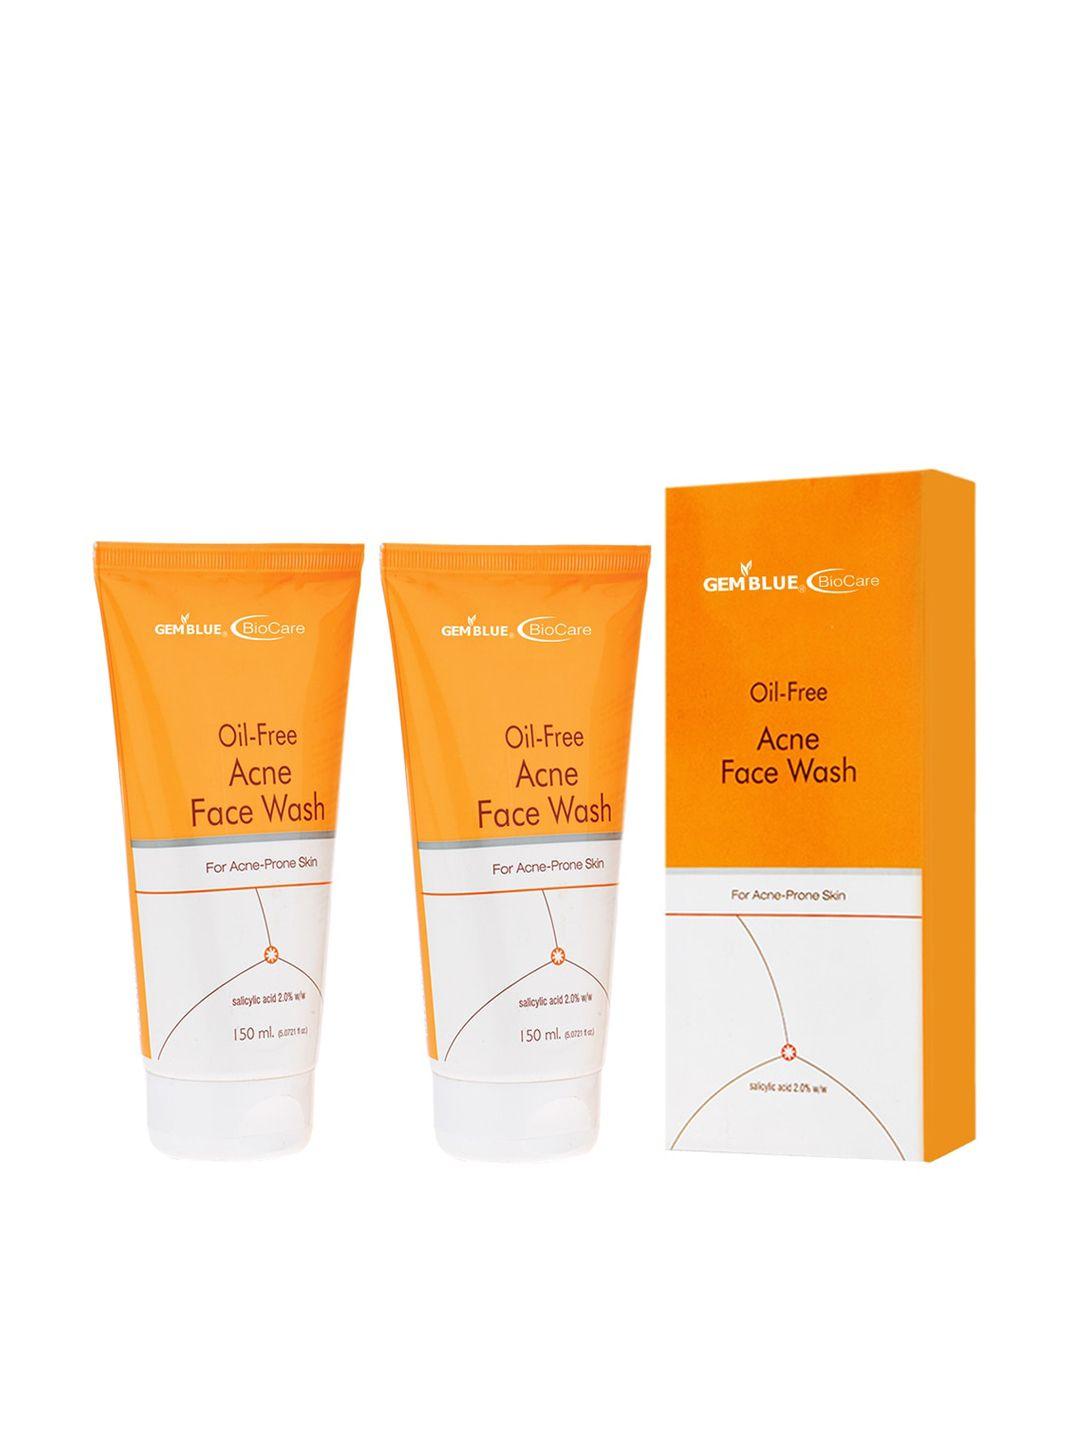 gemblue biocare set of 2 oil-free acne face washes